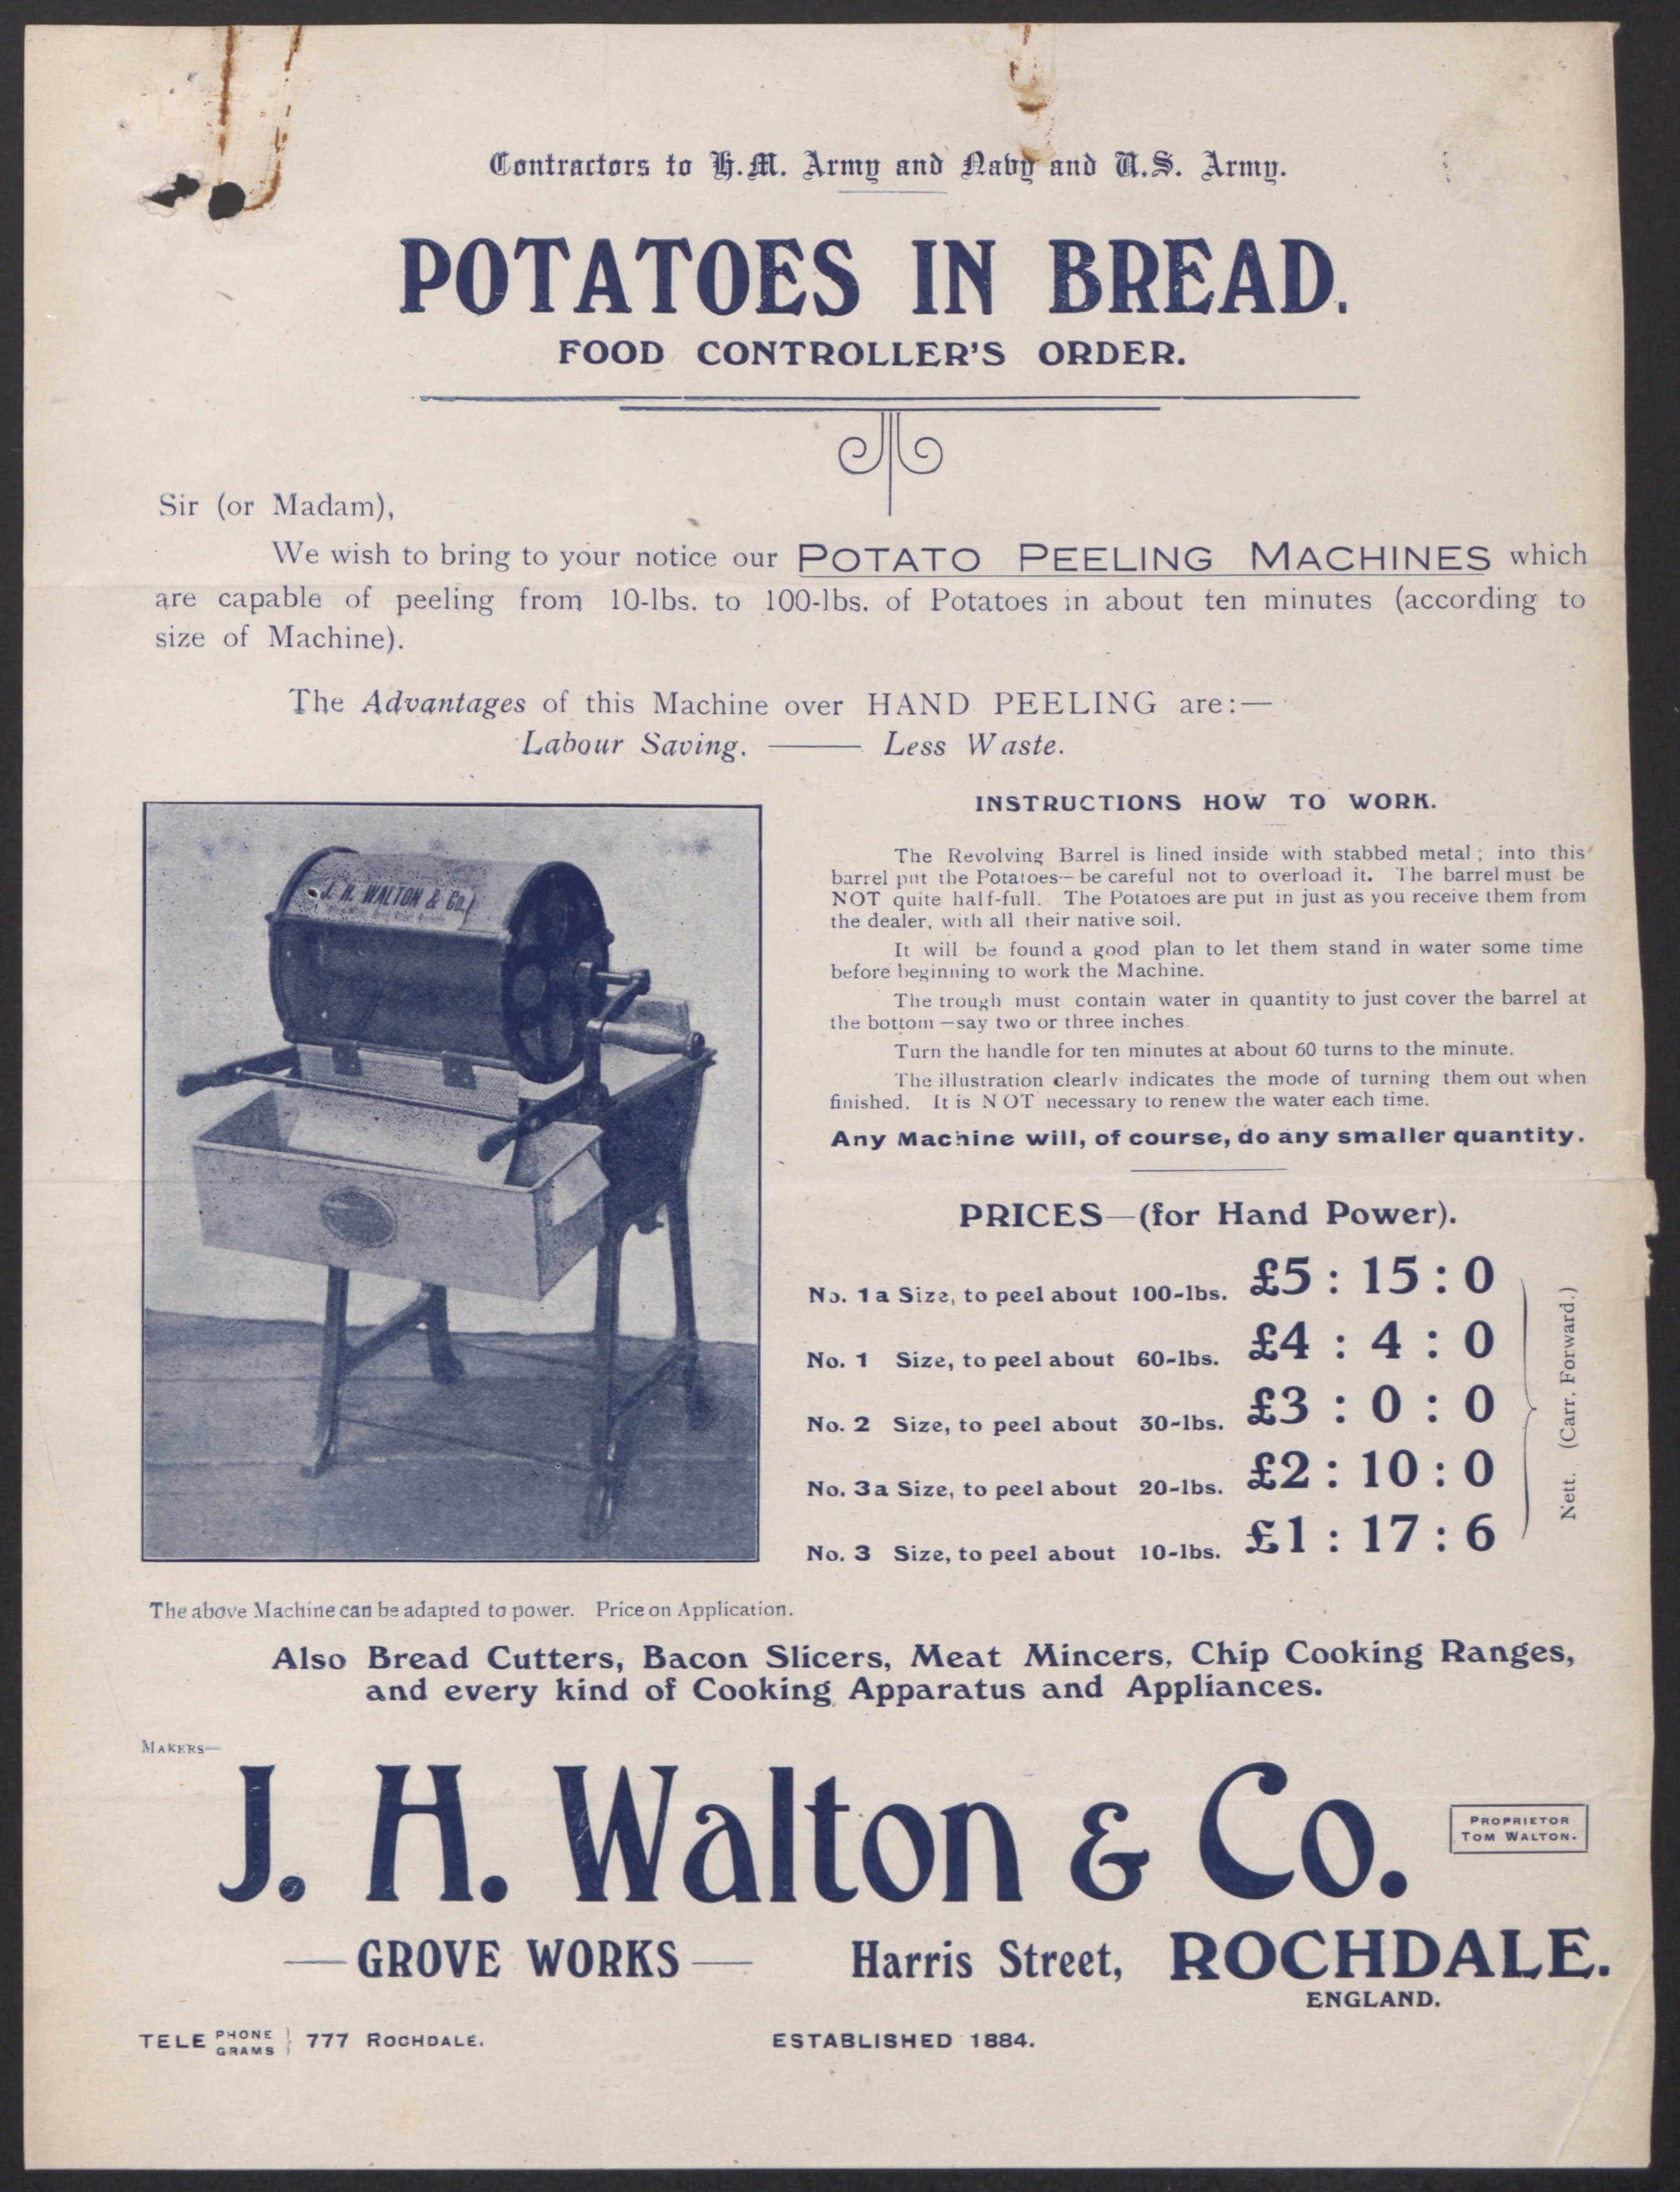 J.H. Walton & Co. Potato Peeling Machine © Images including crown copyright images reproduced by courtesy of The National Archives, London, England. www.nationalarchives.gov.uk